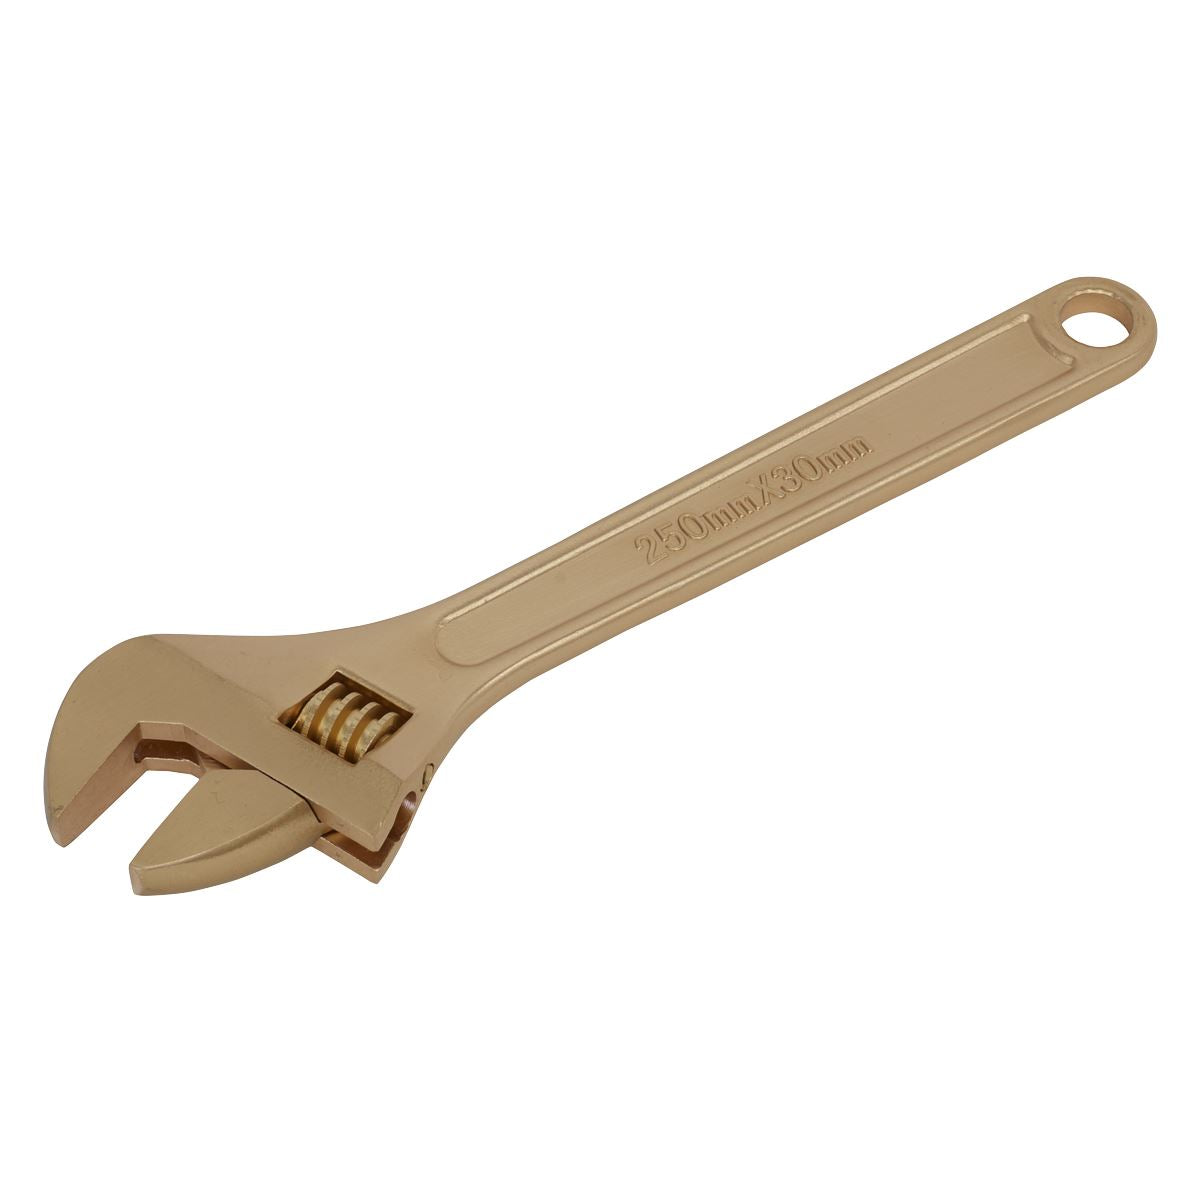 Sealey Premier Adjustable Wrench 250mm - Non-Sparking